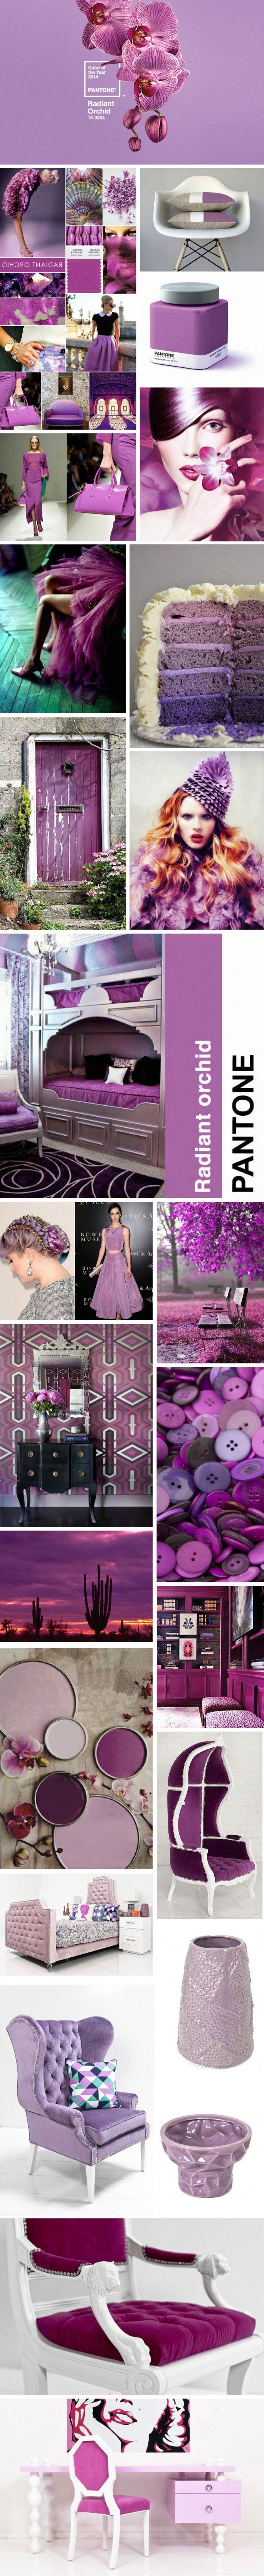 Pantone’s Color of the Year 2014: Radiant Orchid